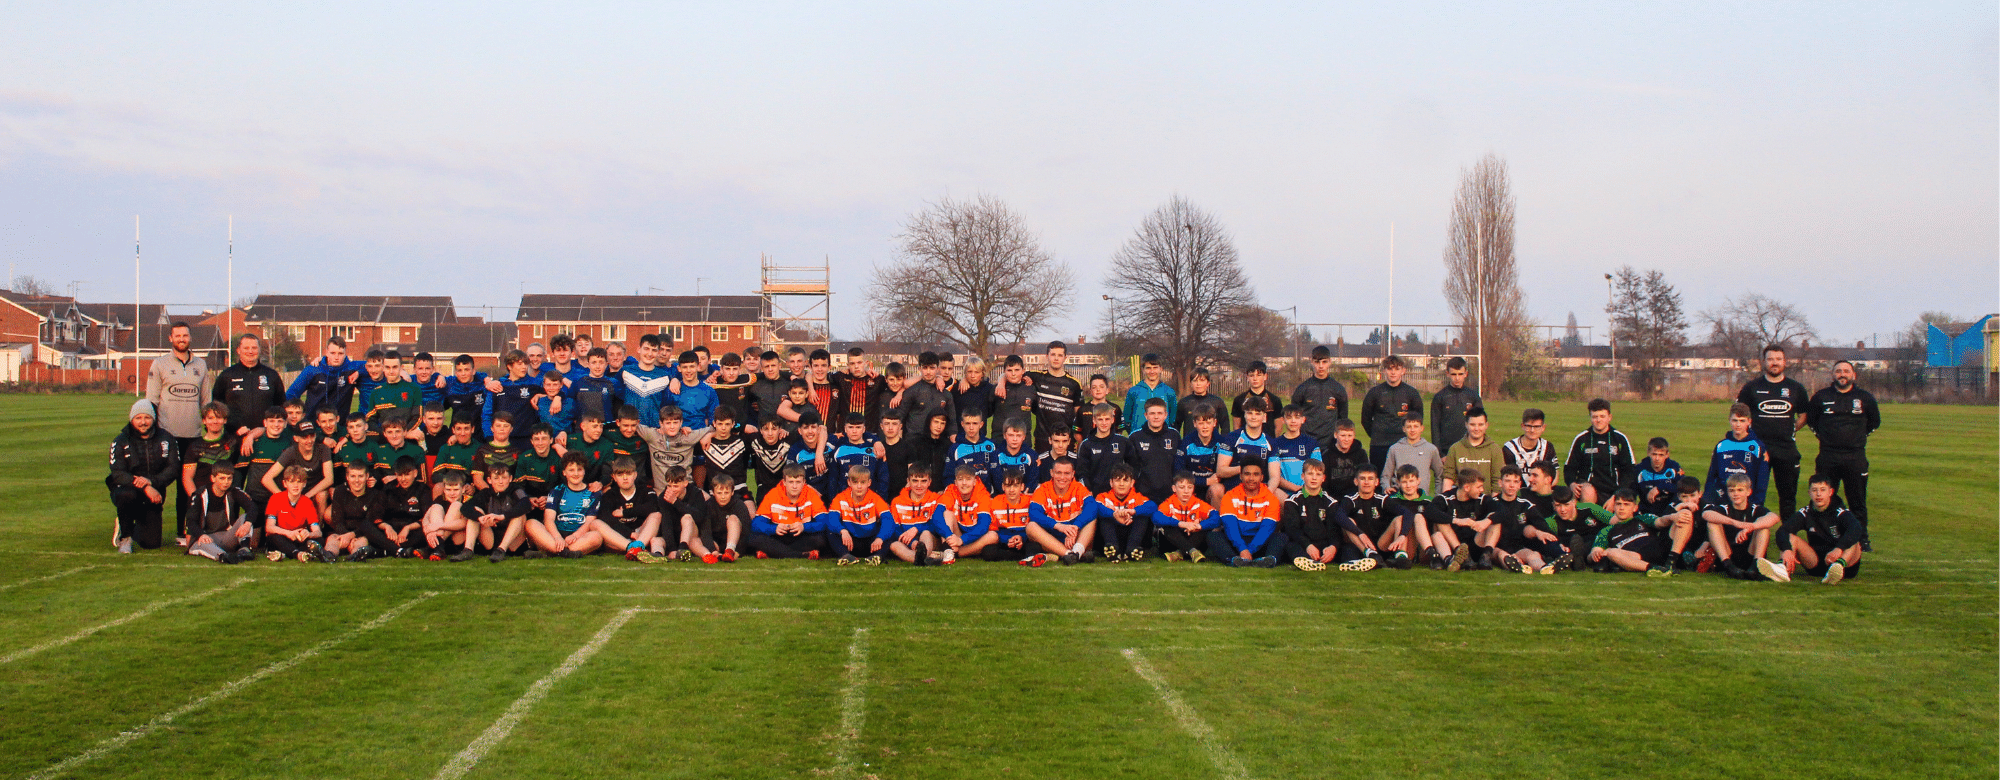 Over 100 Local U14s Players Attend Opening ‘Embed The Pathway’ Session